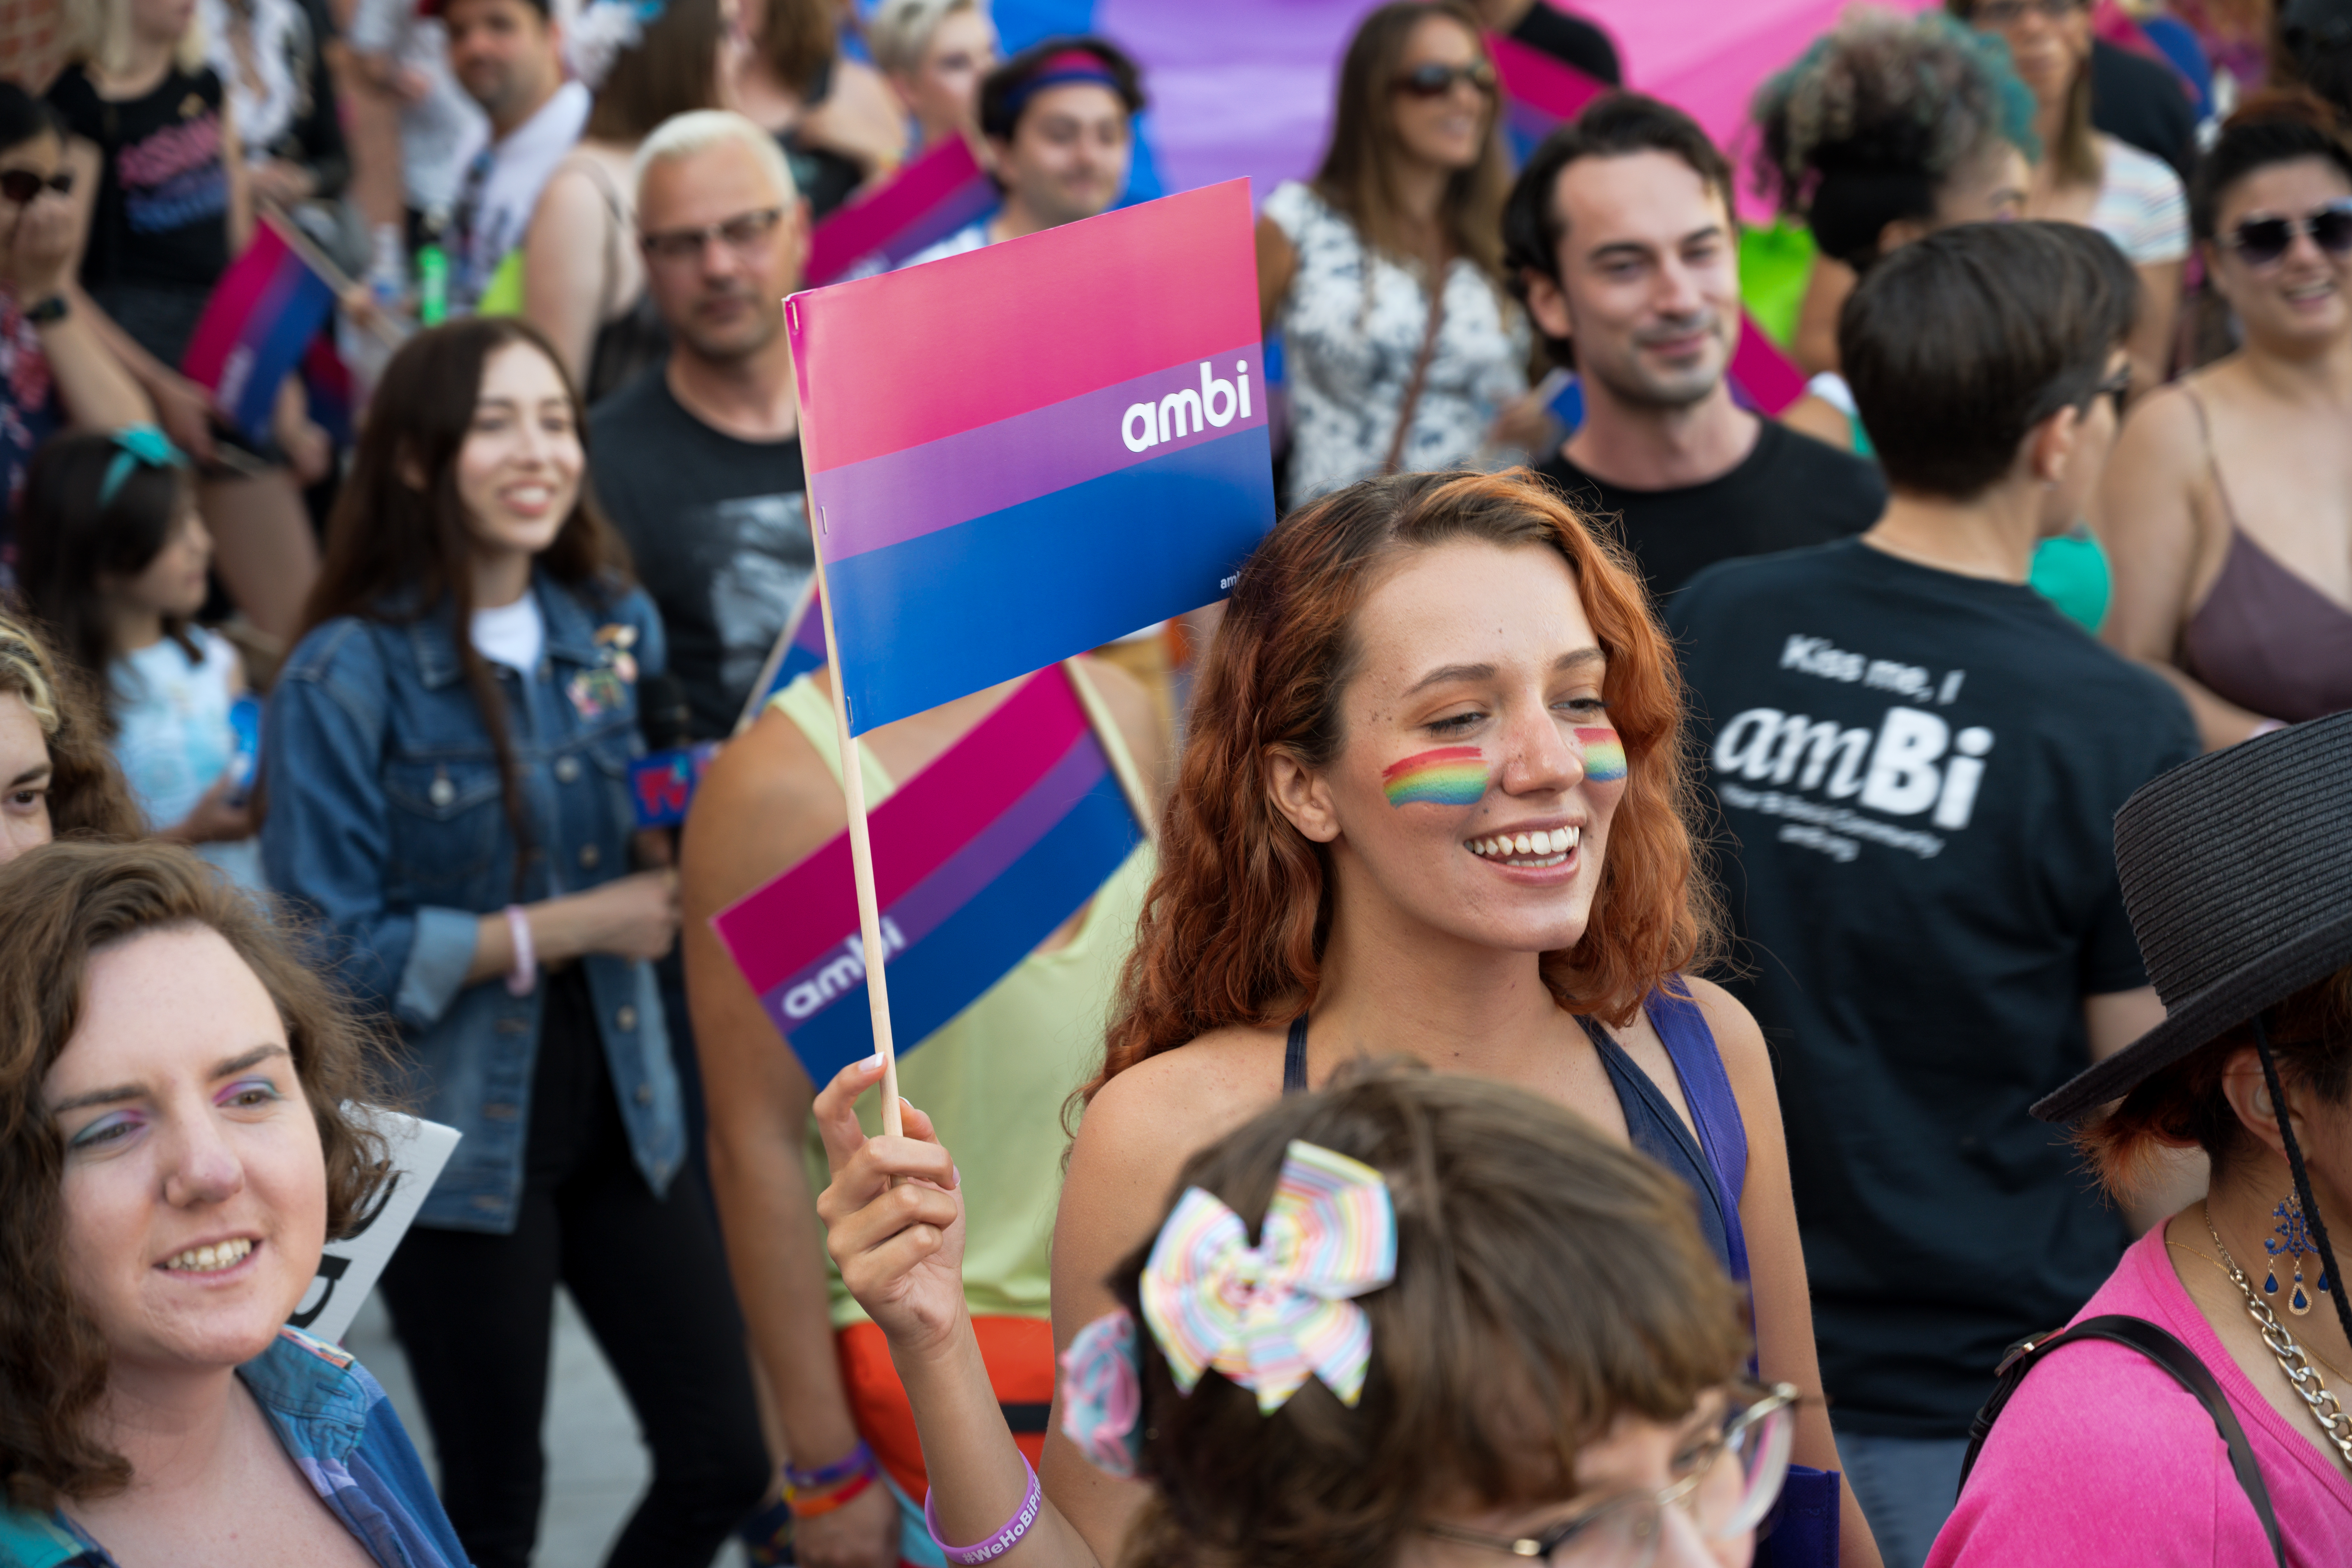 During Pride, a large group marches and a woman holds a bi flag above her head smiling.